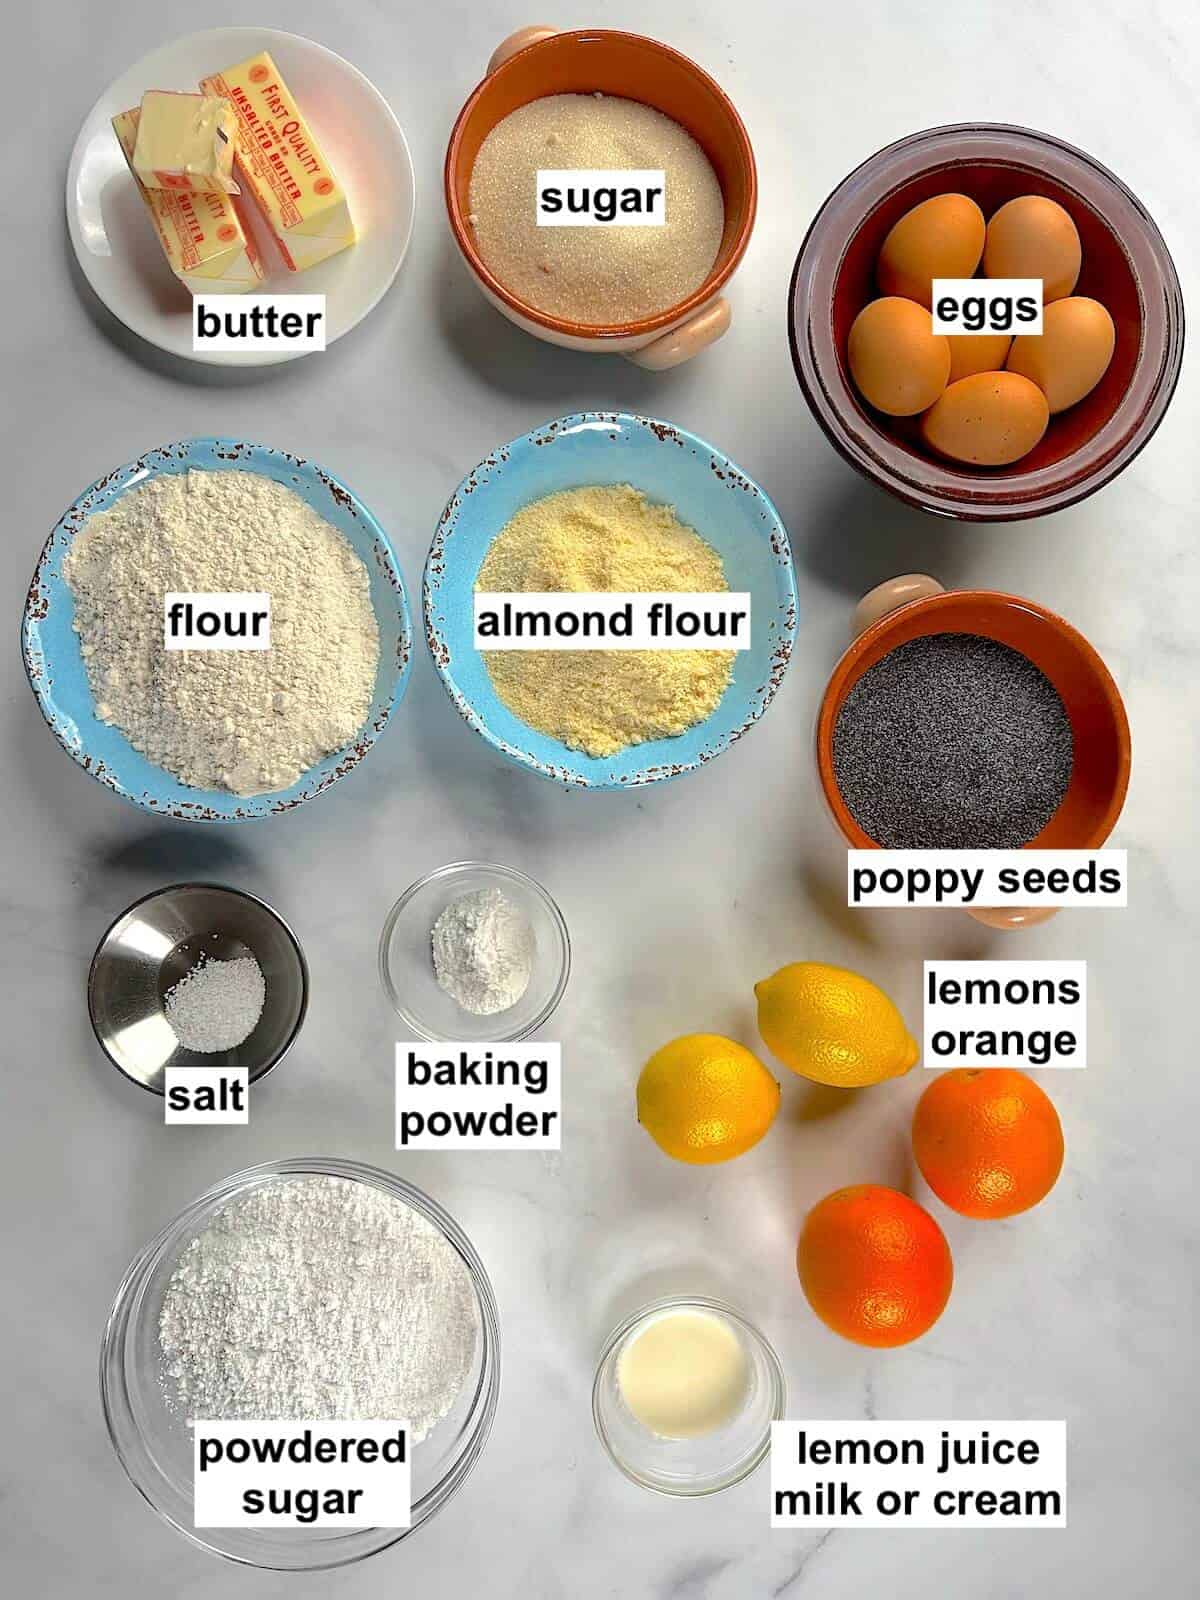 Ingredients needed for the recipe.